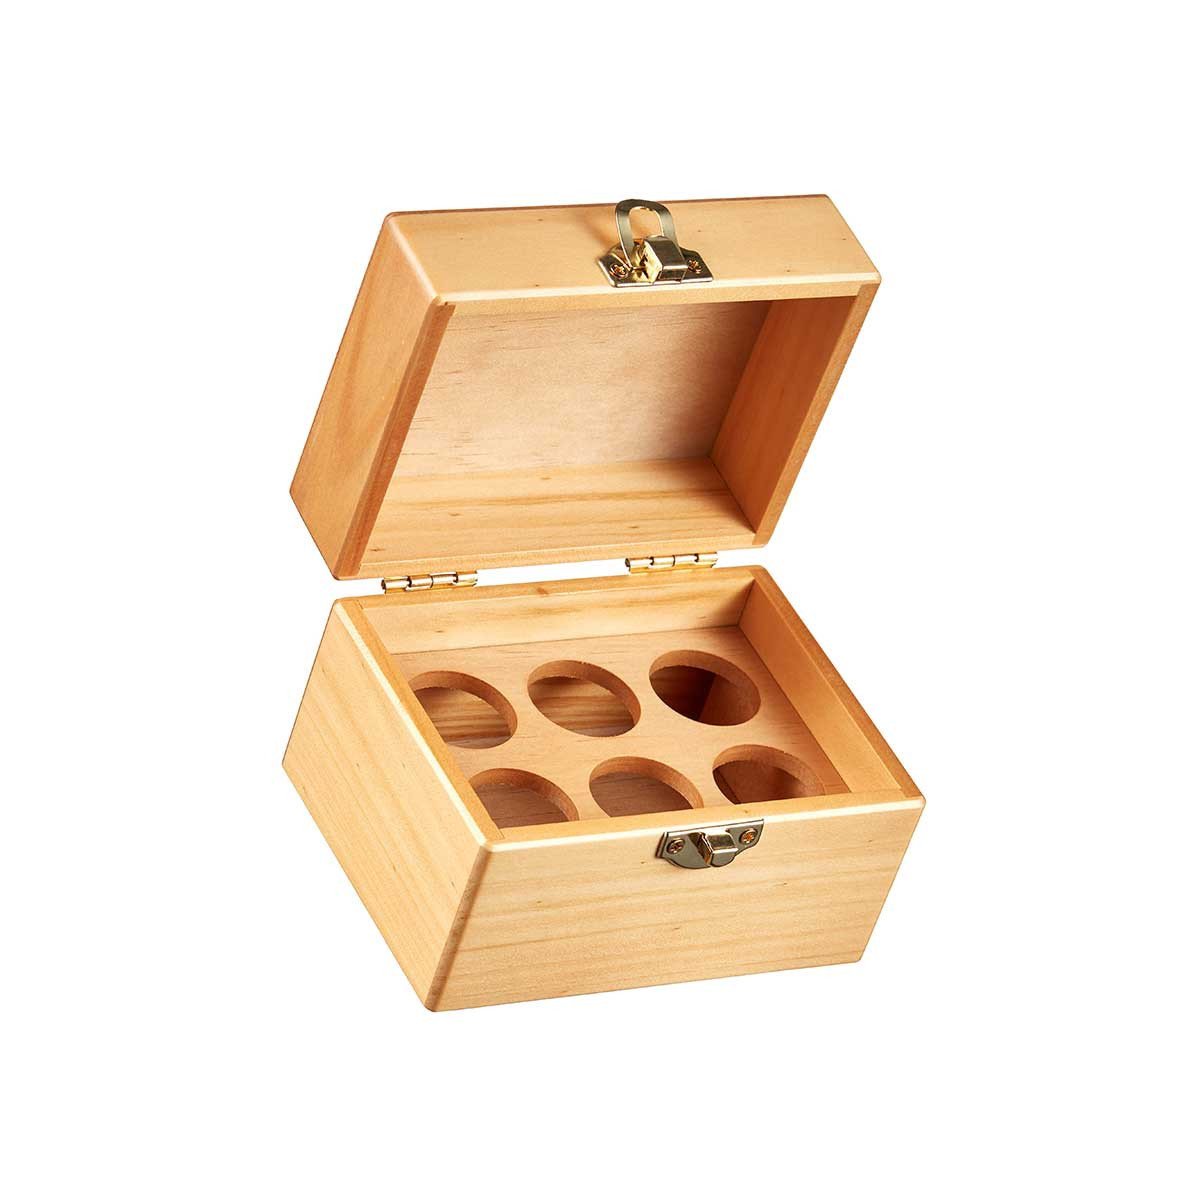 Wooden Storage Box For 6 x 10ml Bottles of Essential Oil 